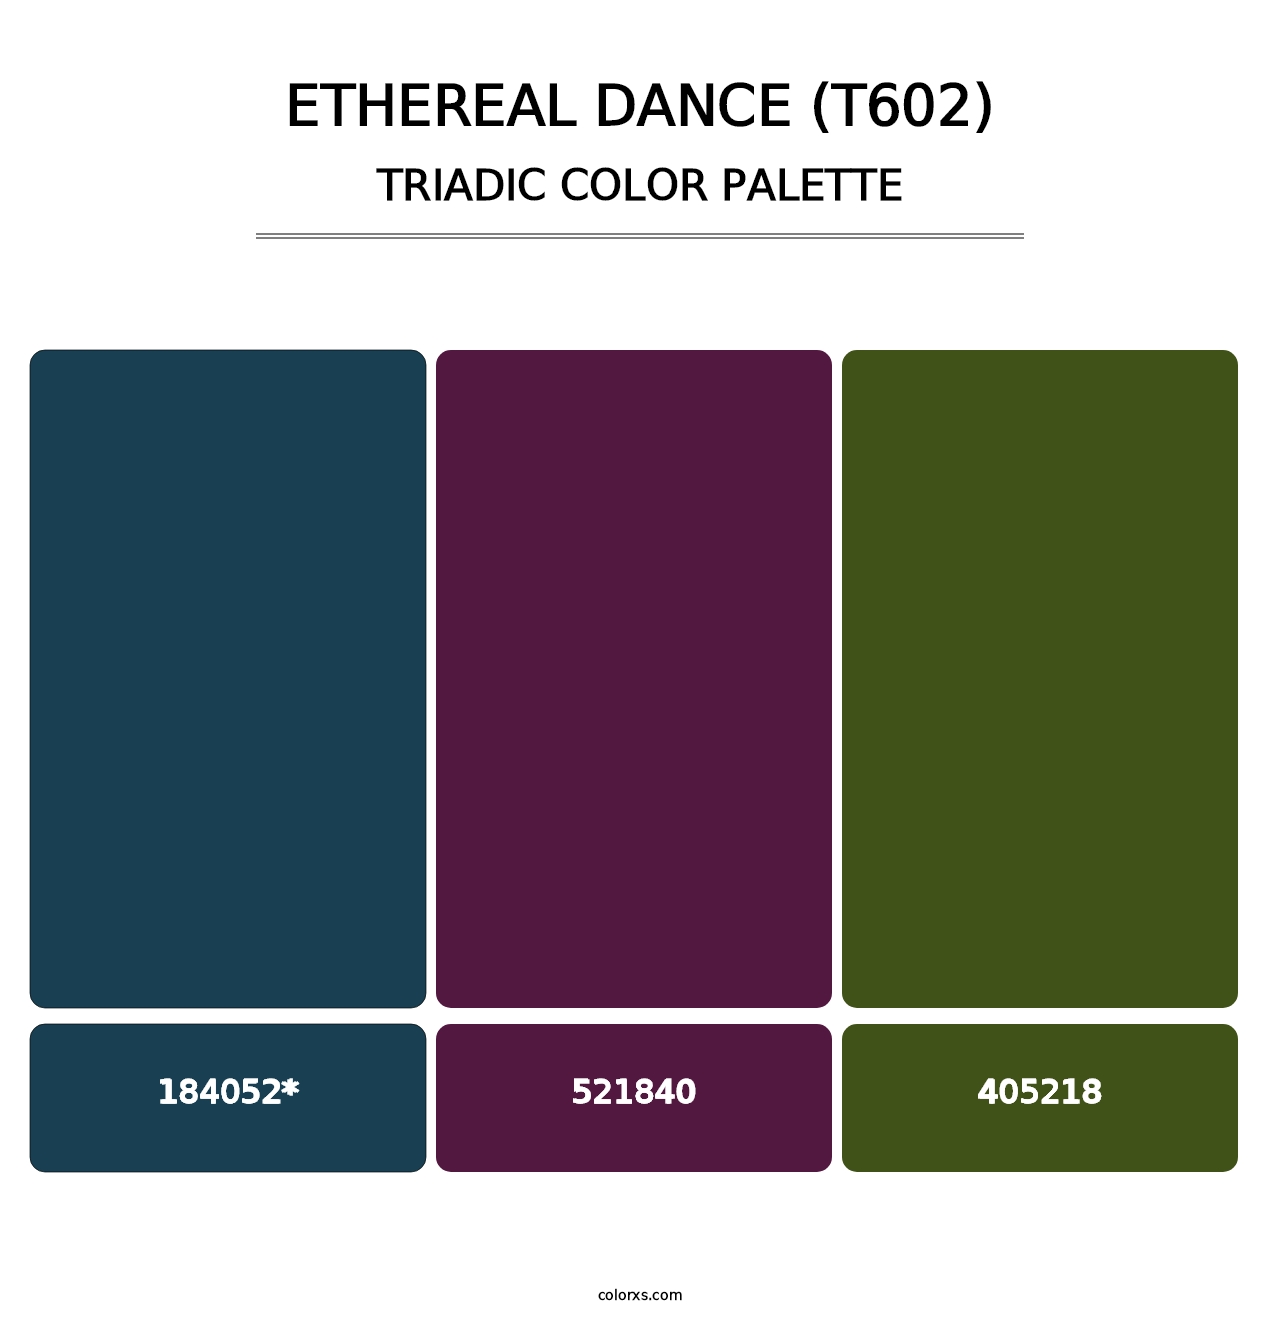 Ethereal Dance (T602) - Triadic Color Palette